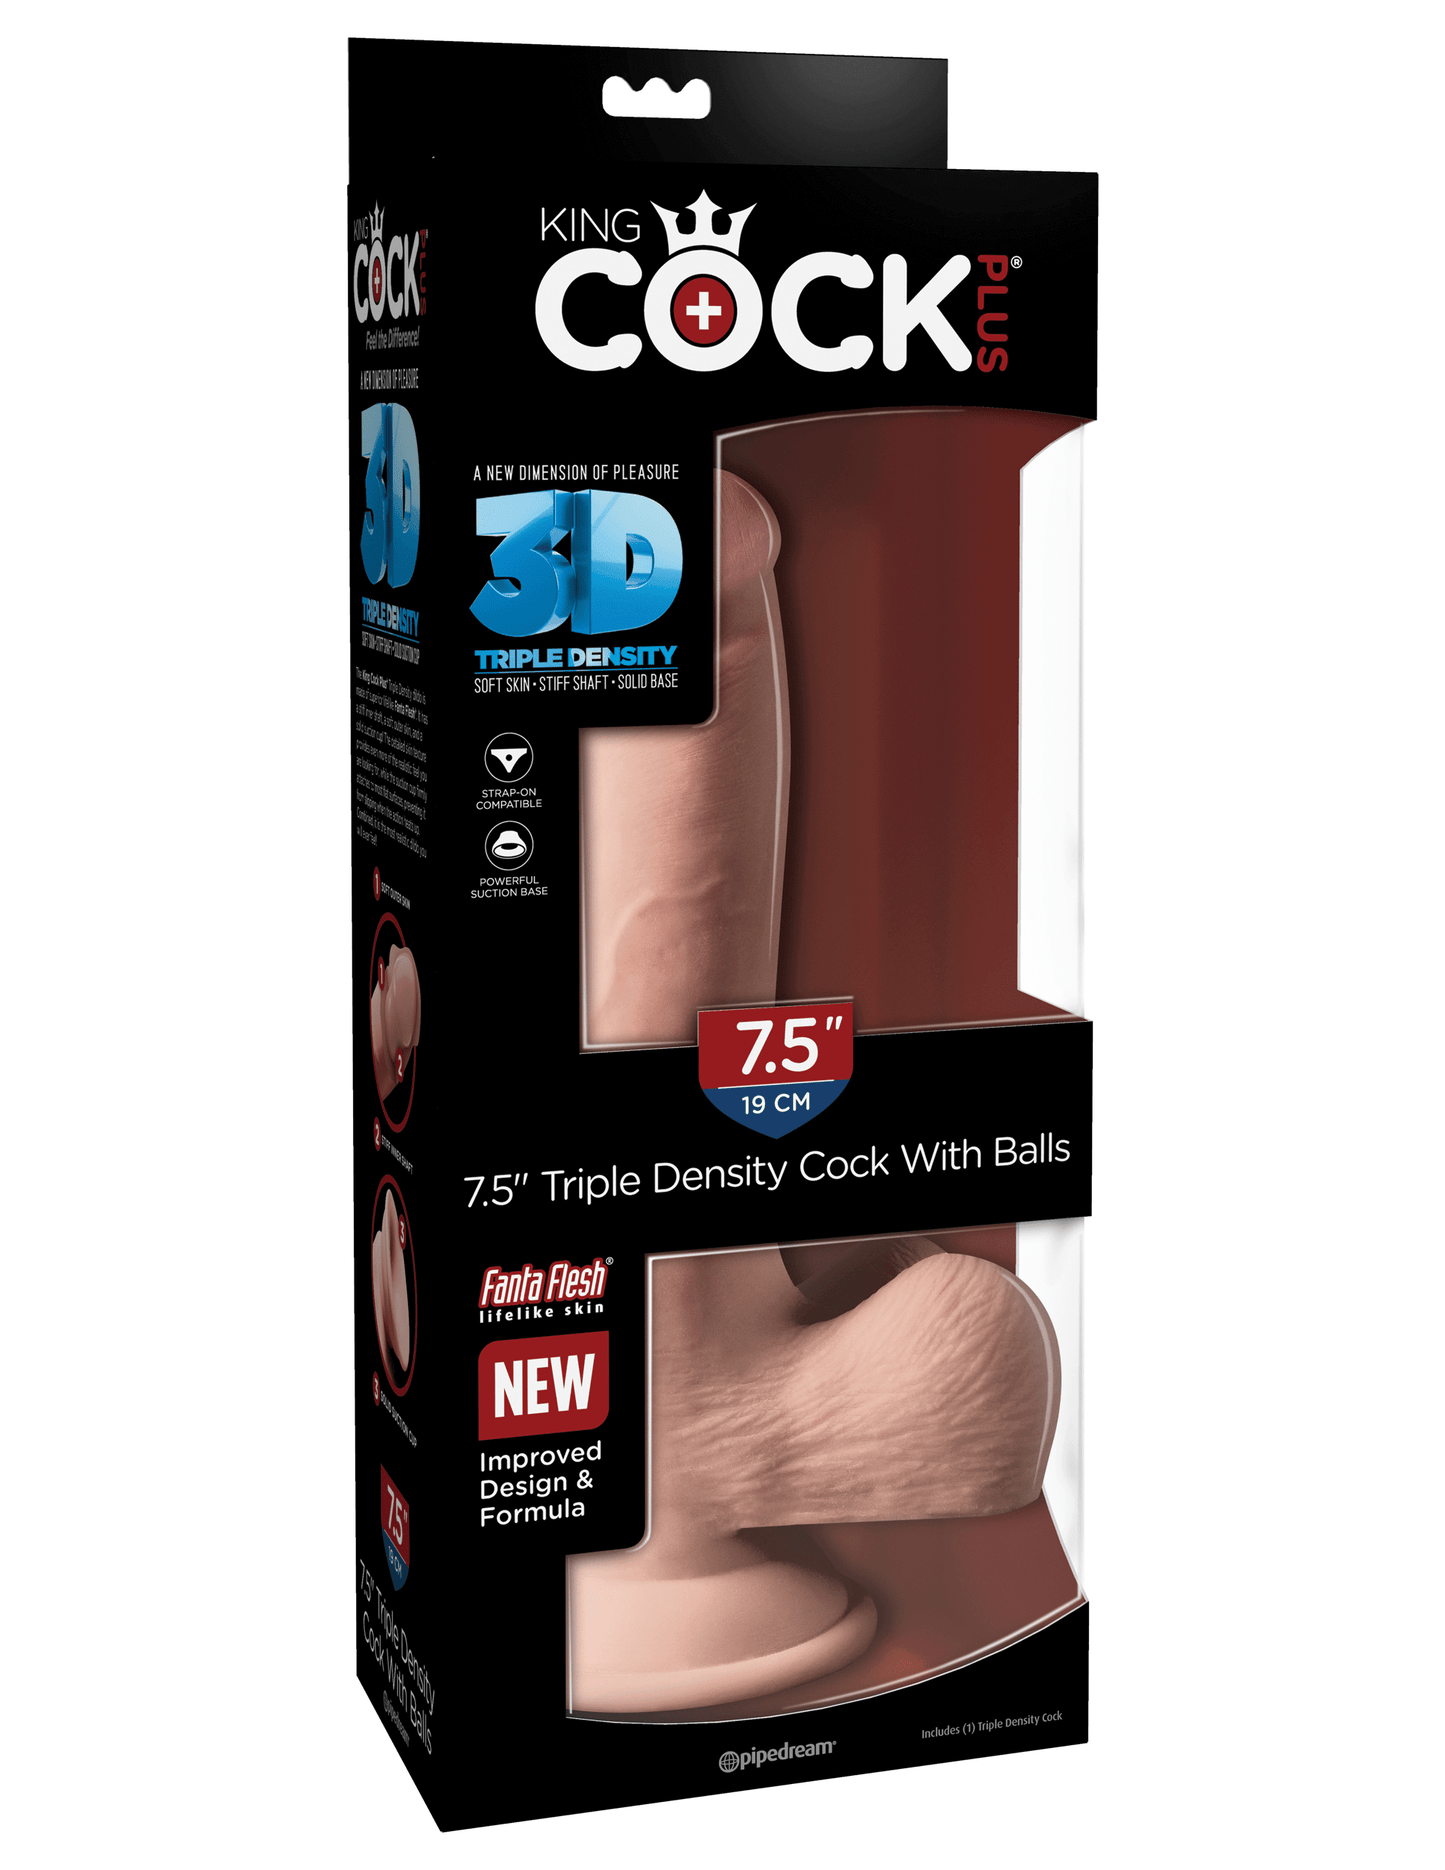 King Cock Plus 7.5"" Triple Density Cock with Balls - Light - Thorn & Feather